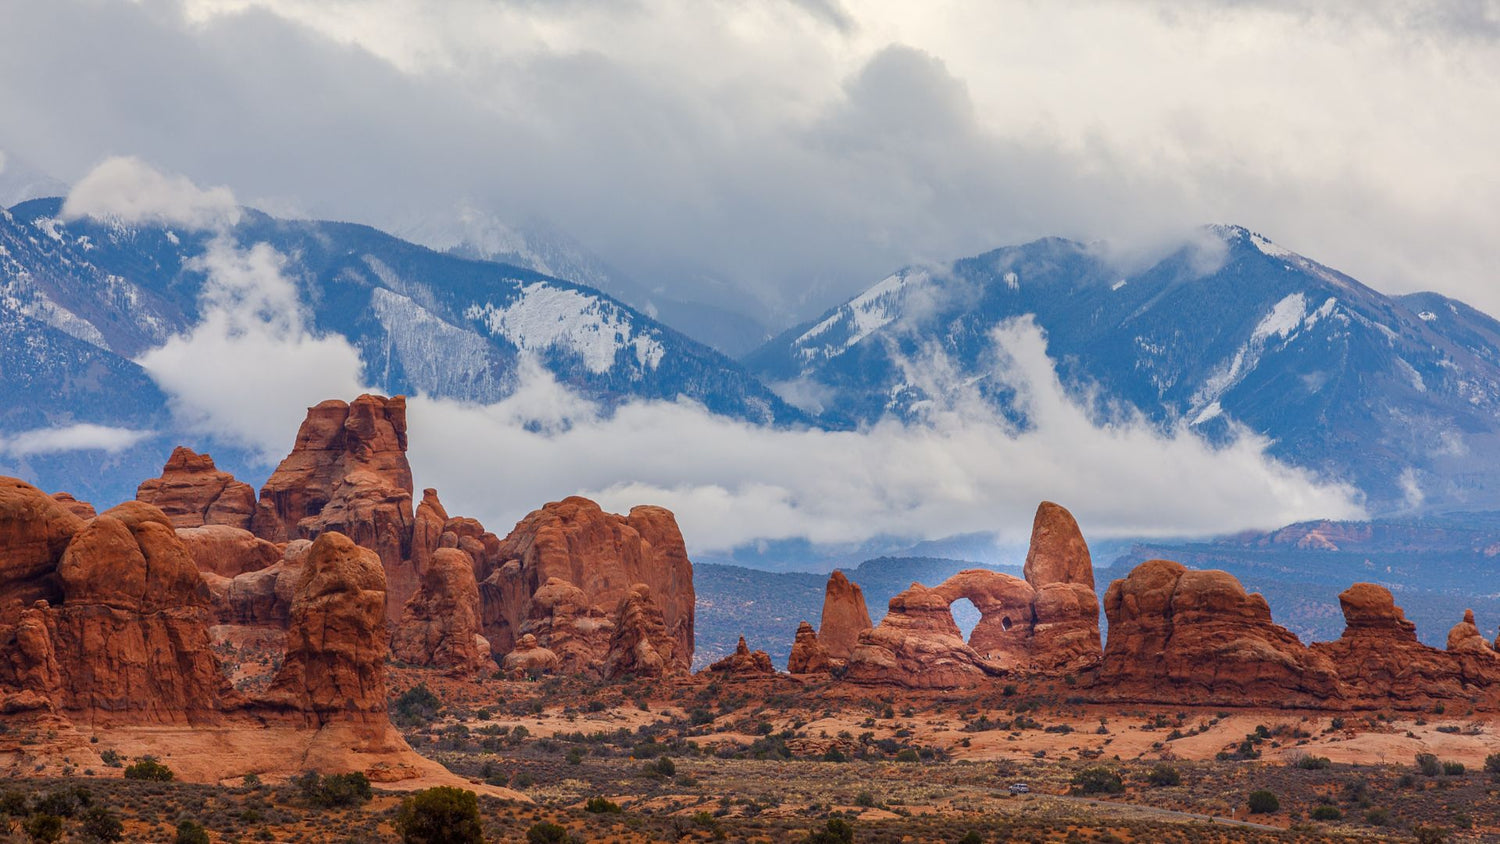 A view of Arches National Park, Moab, Utah. - History By Mail